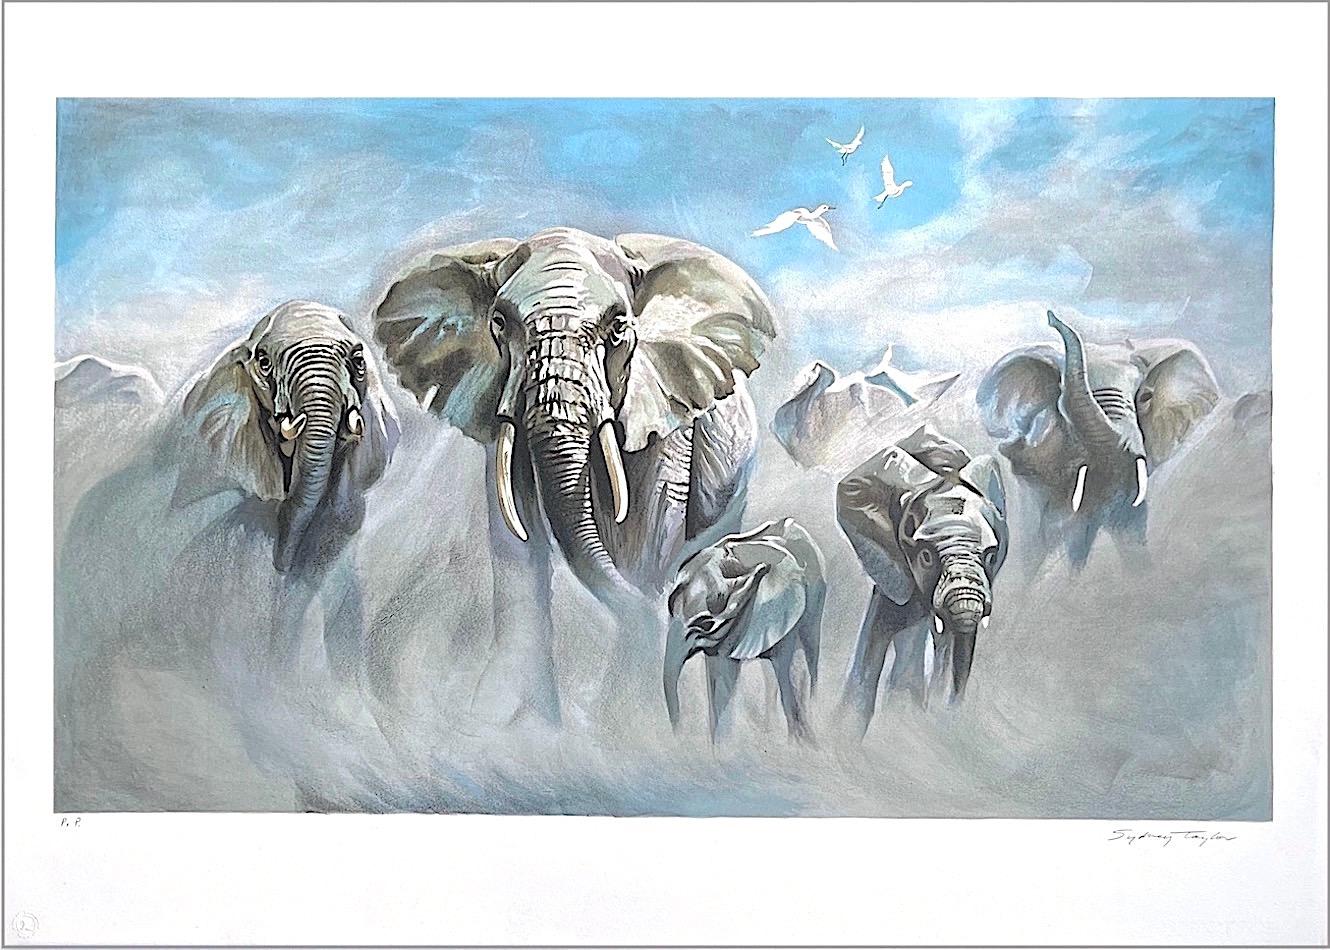 Sydney Taylor Animal Print - DUSTING ELEPHANTS Signed Lithograph, African Wildlife, Blue, Gray, White 